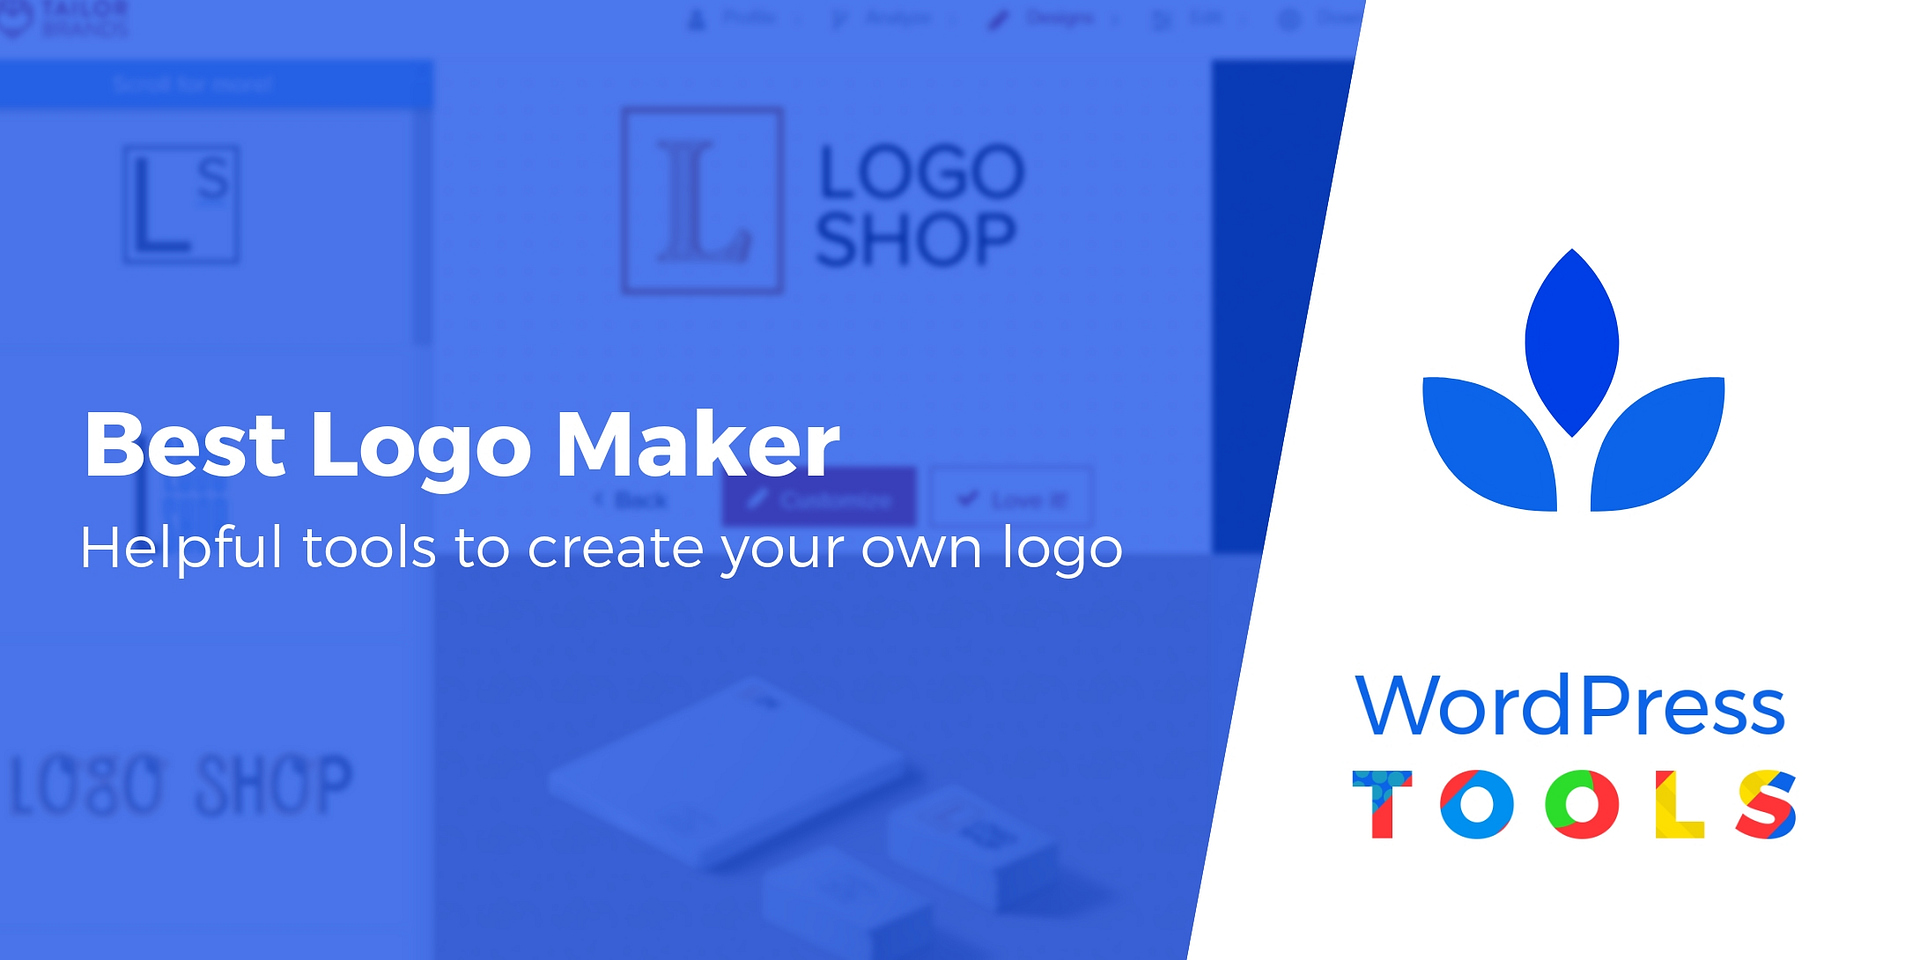 Best Logo Maker 10 Great Tools Compared For 2020 - roblox clothing template 2019 roblox gfx generator